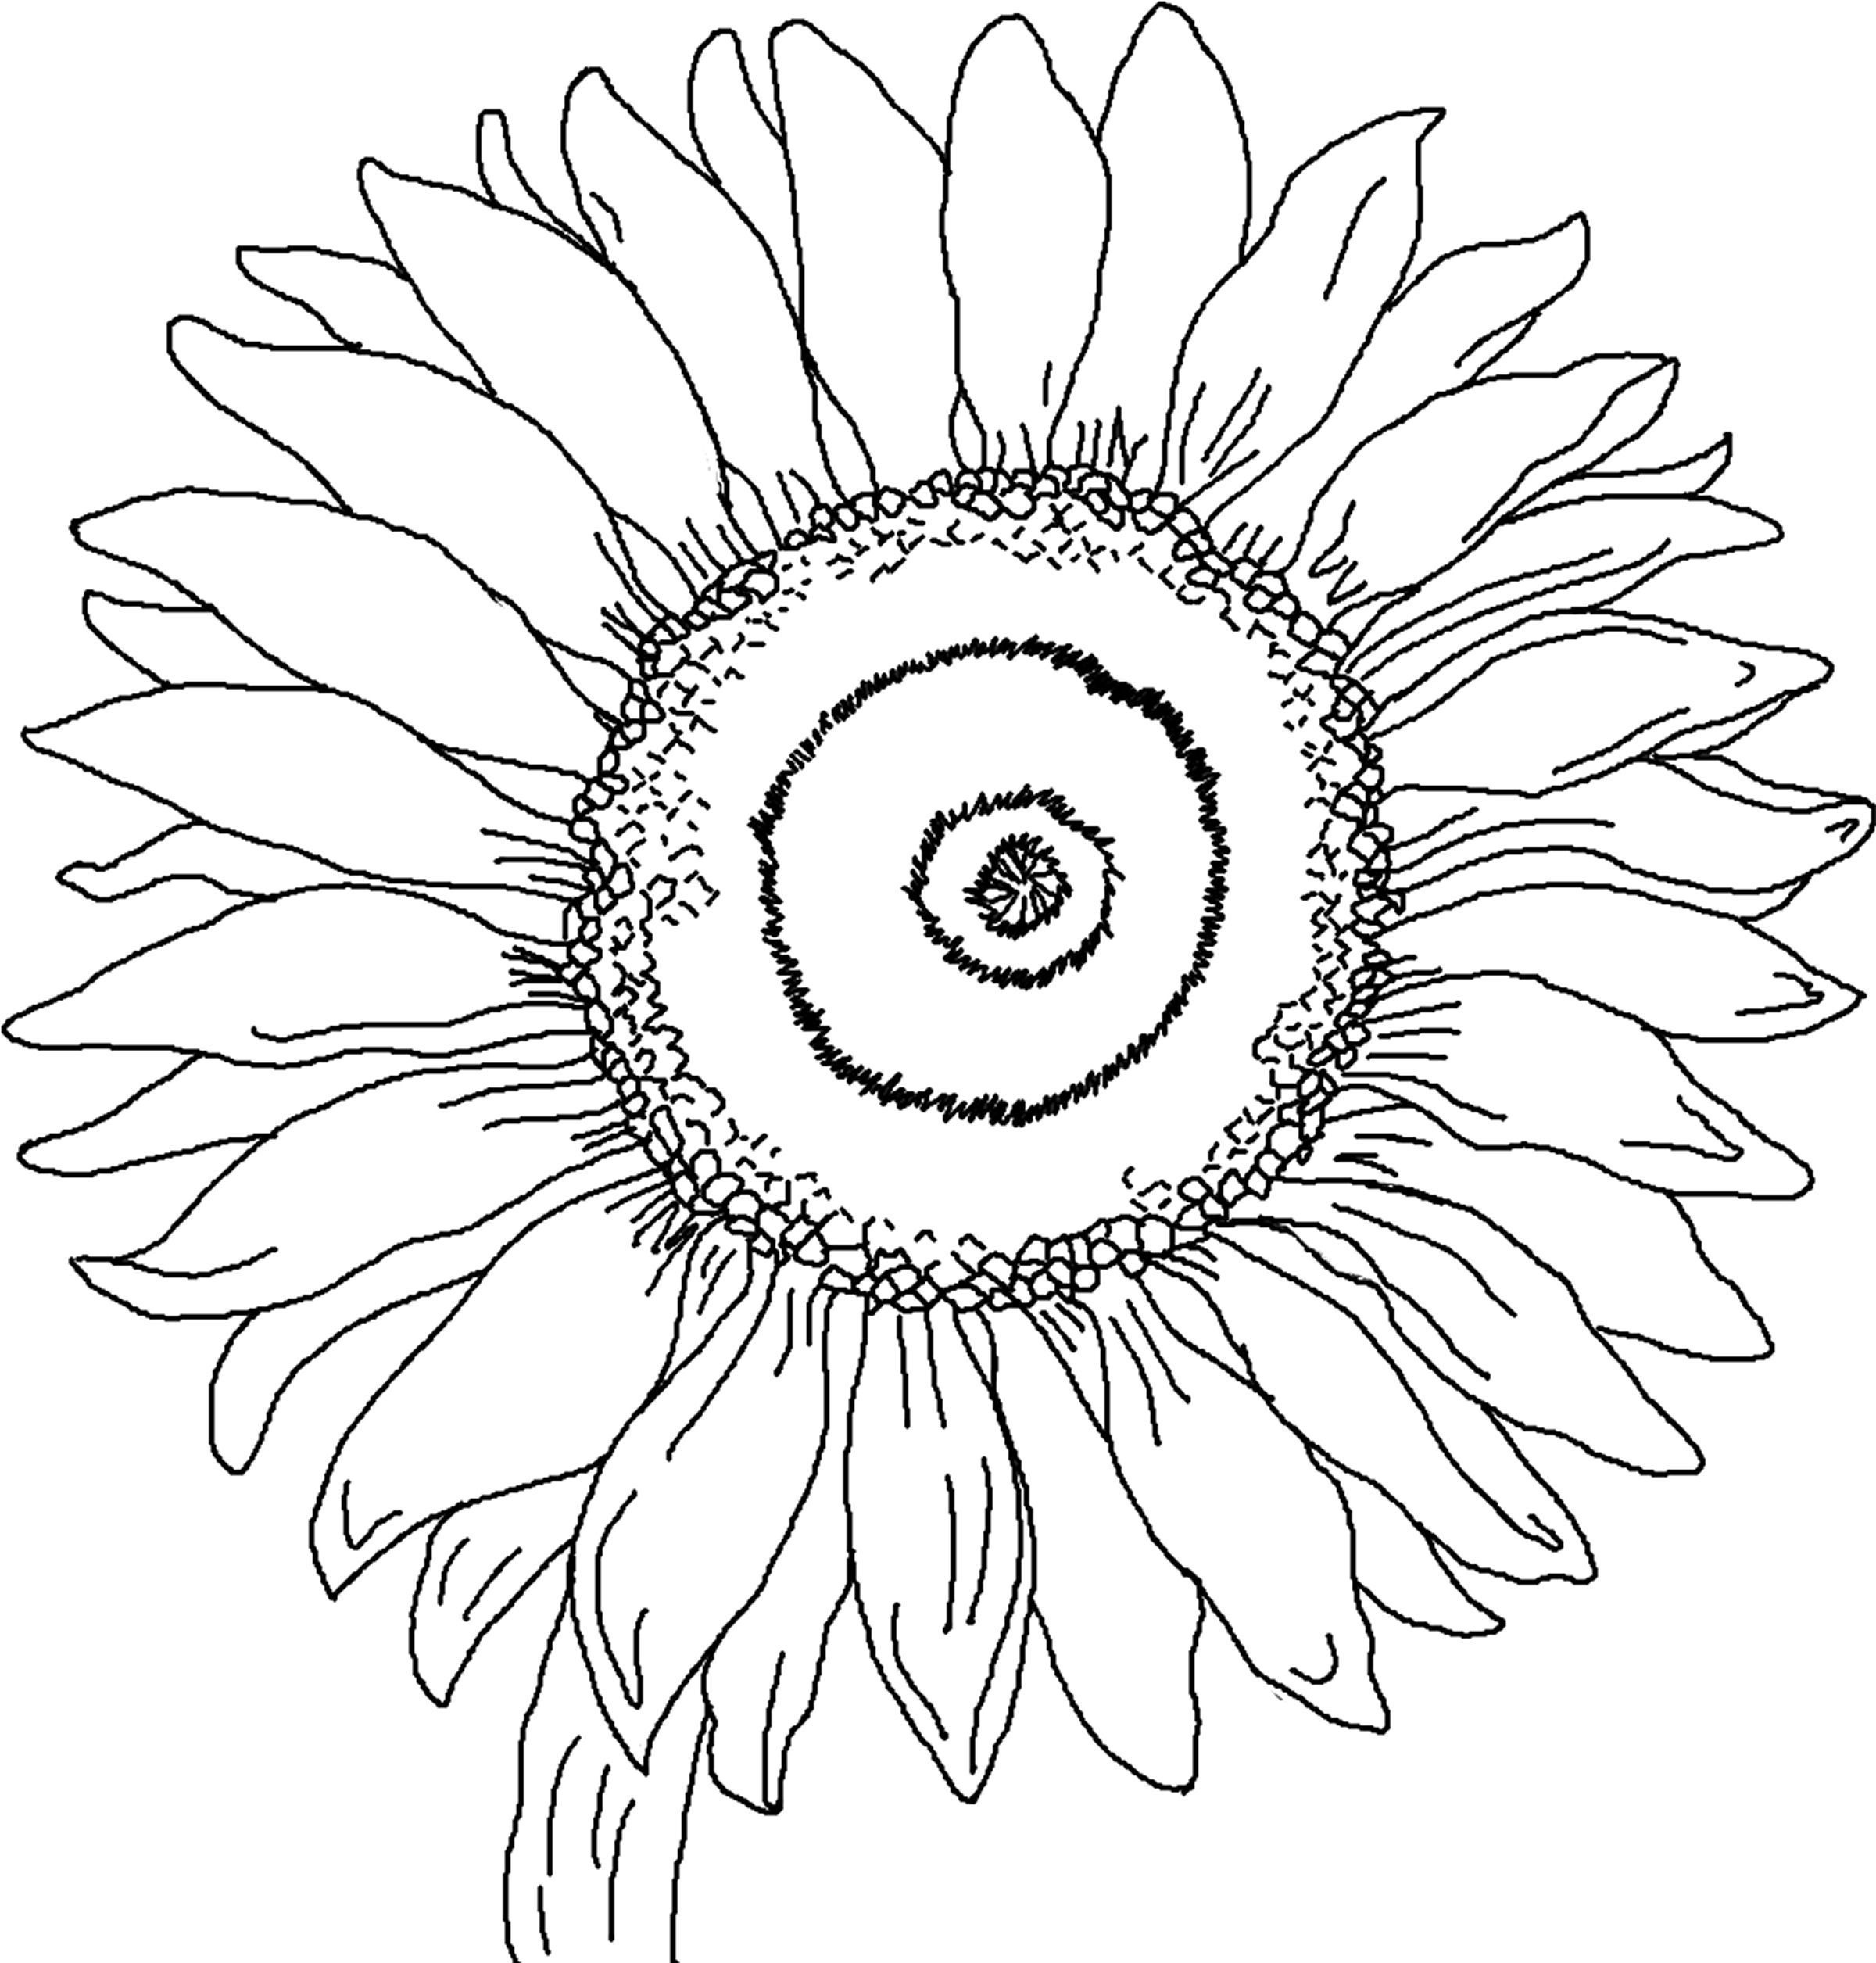 Free Printable Sunflower Coloring Pages For Kids | Auction Art - Free Printable Sunflower Template